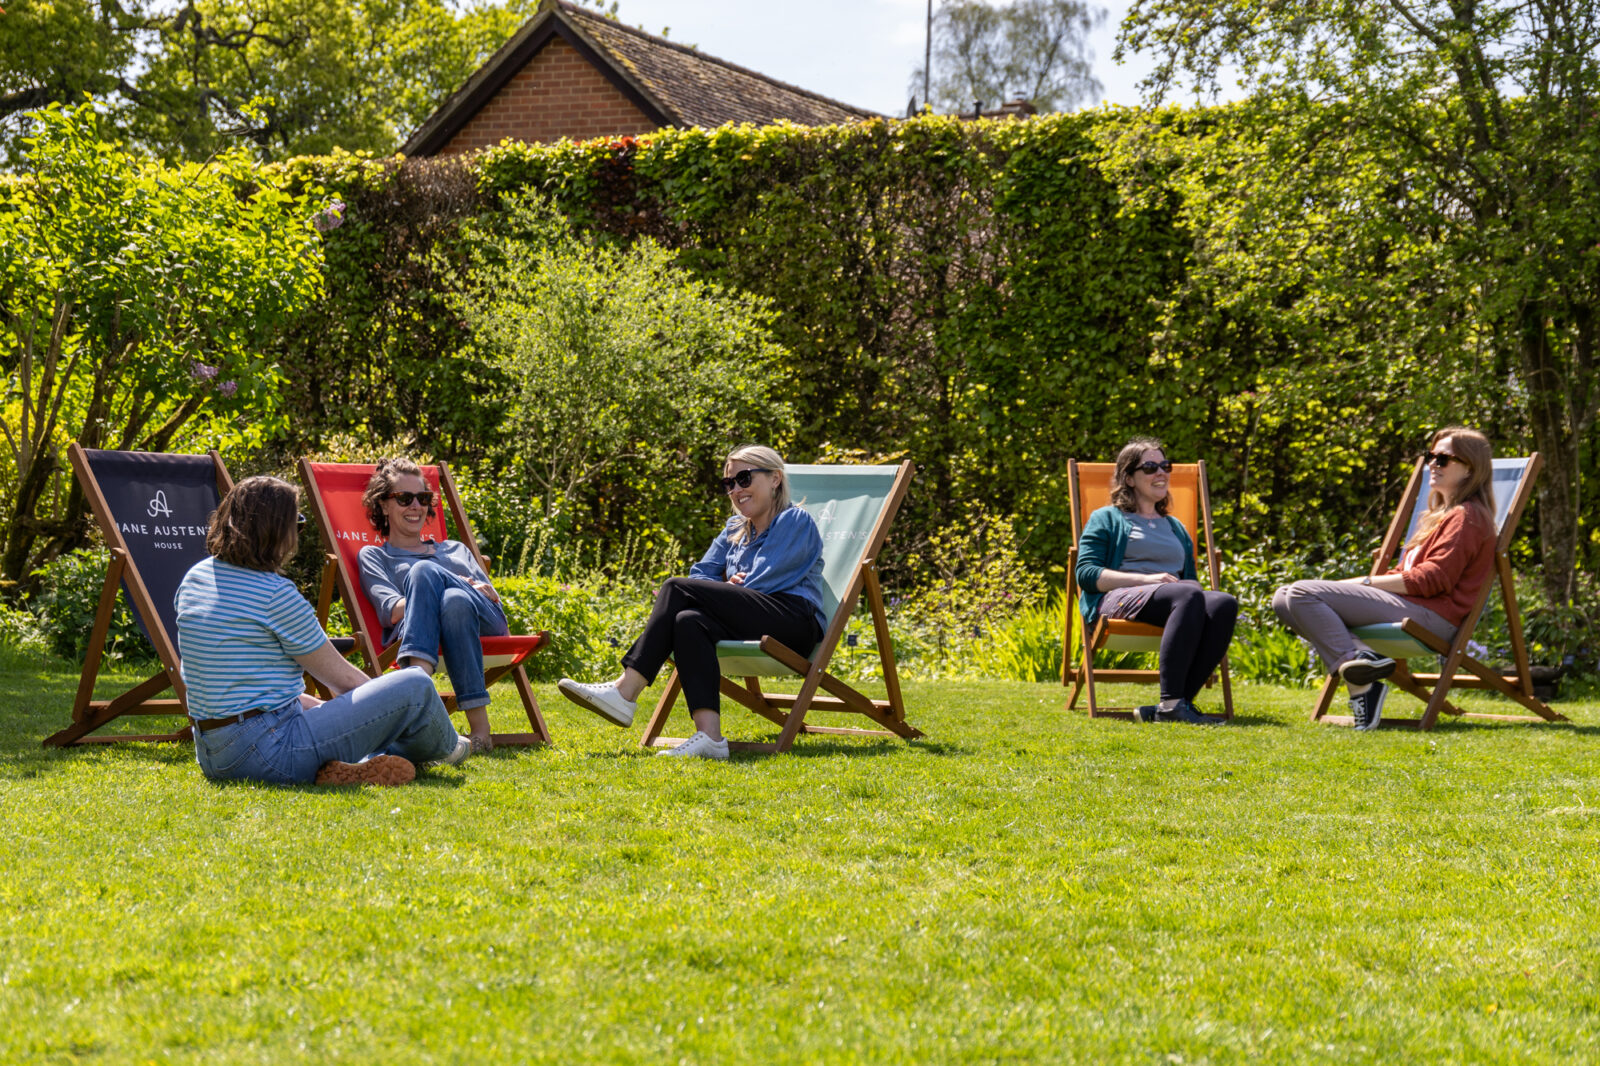 Visitors relaxing in the sun on colourful deckchairs in the garden of Jane Austen's House